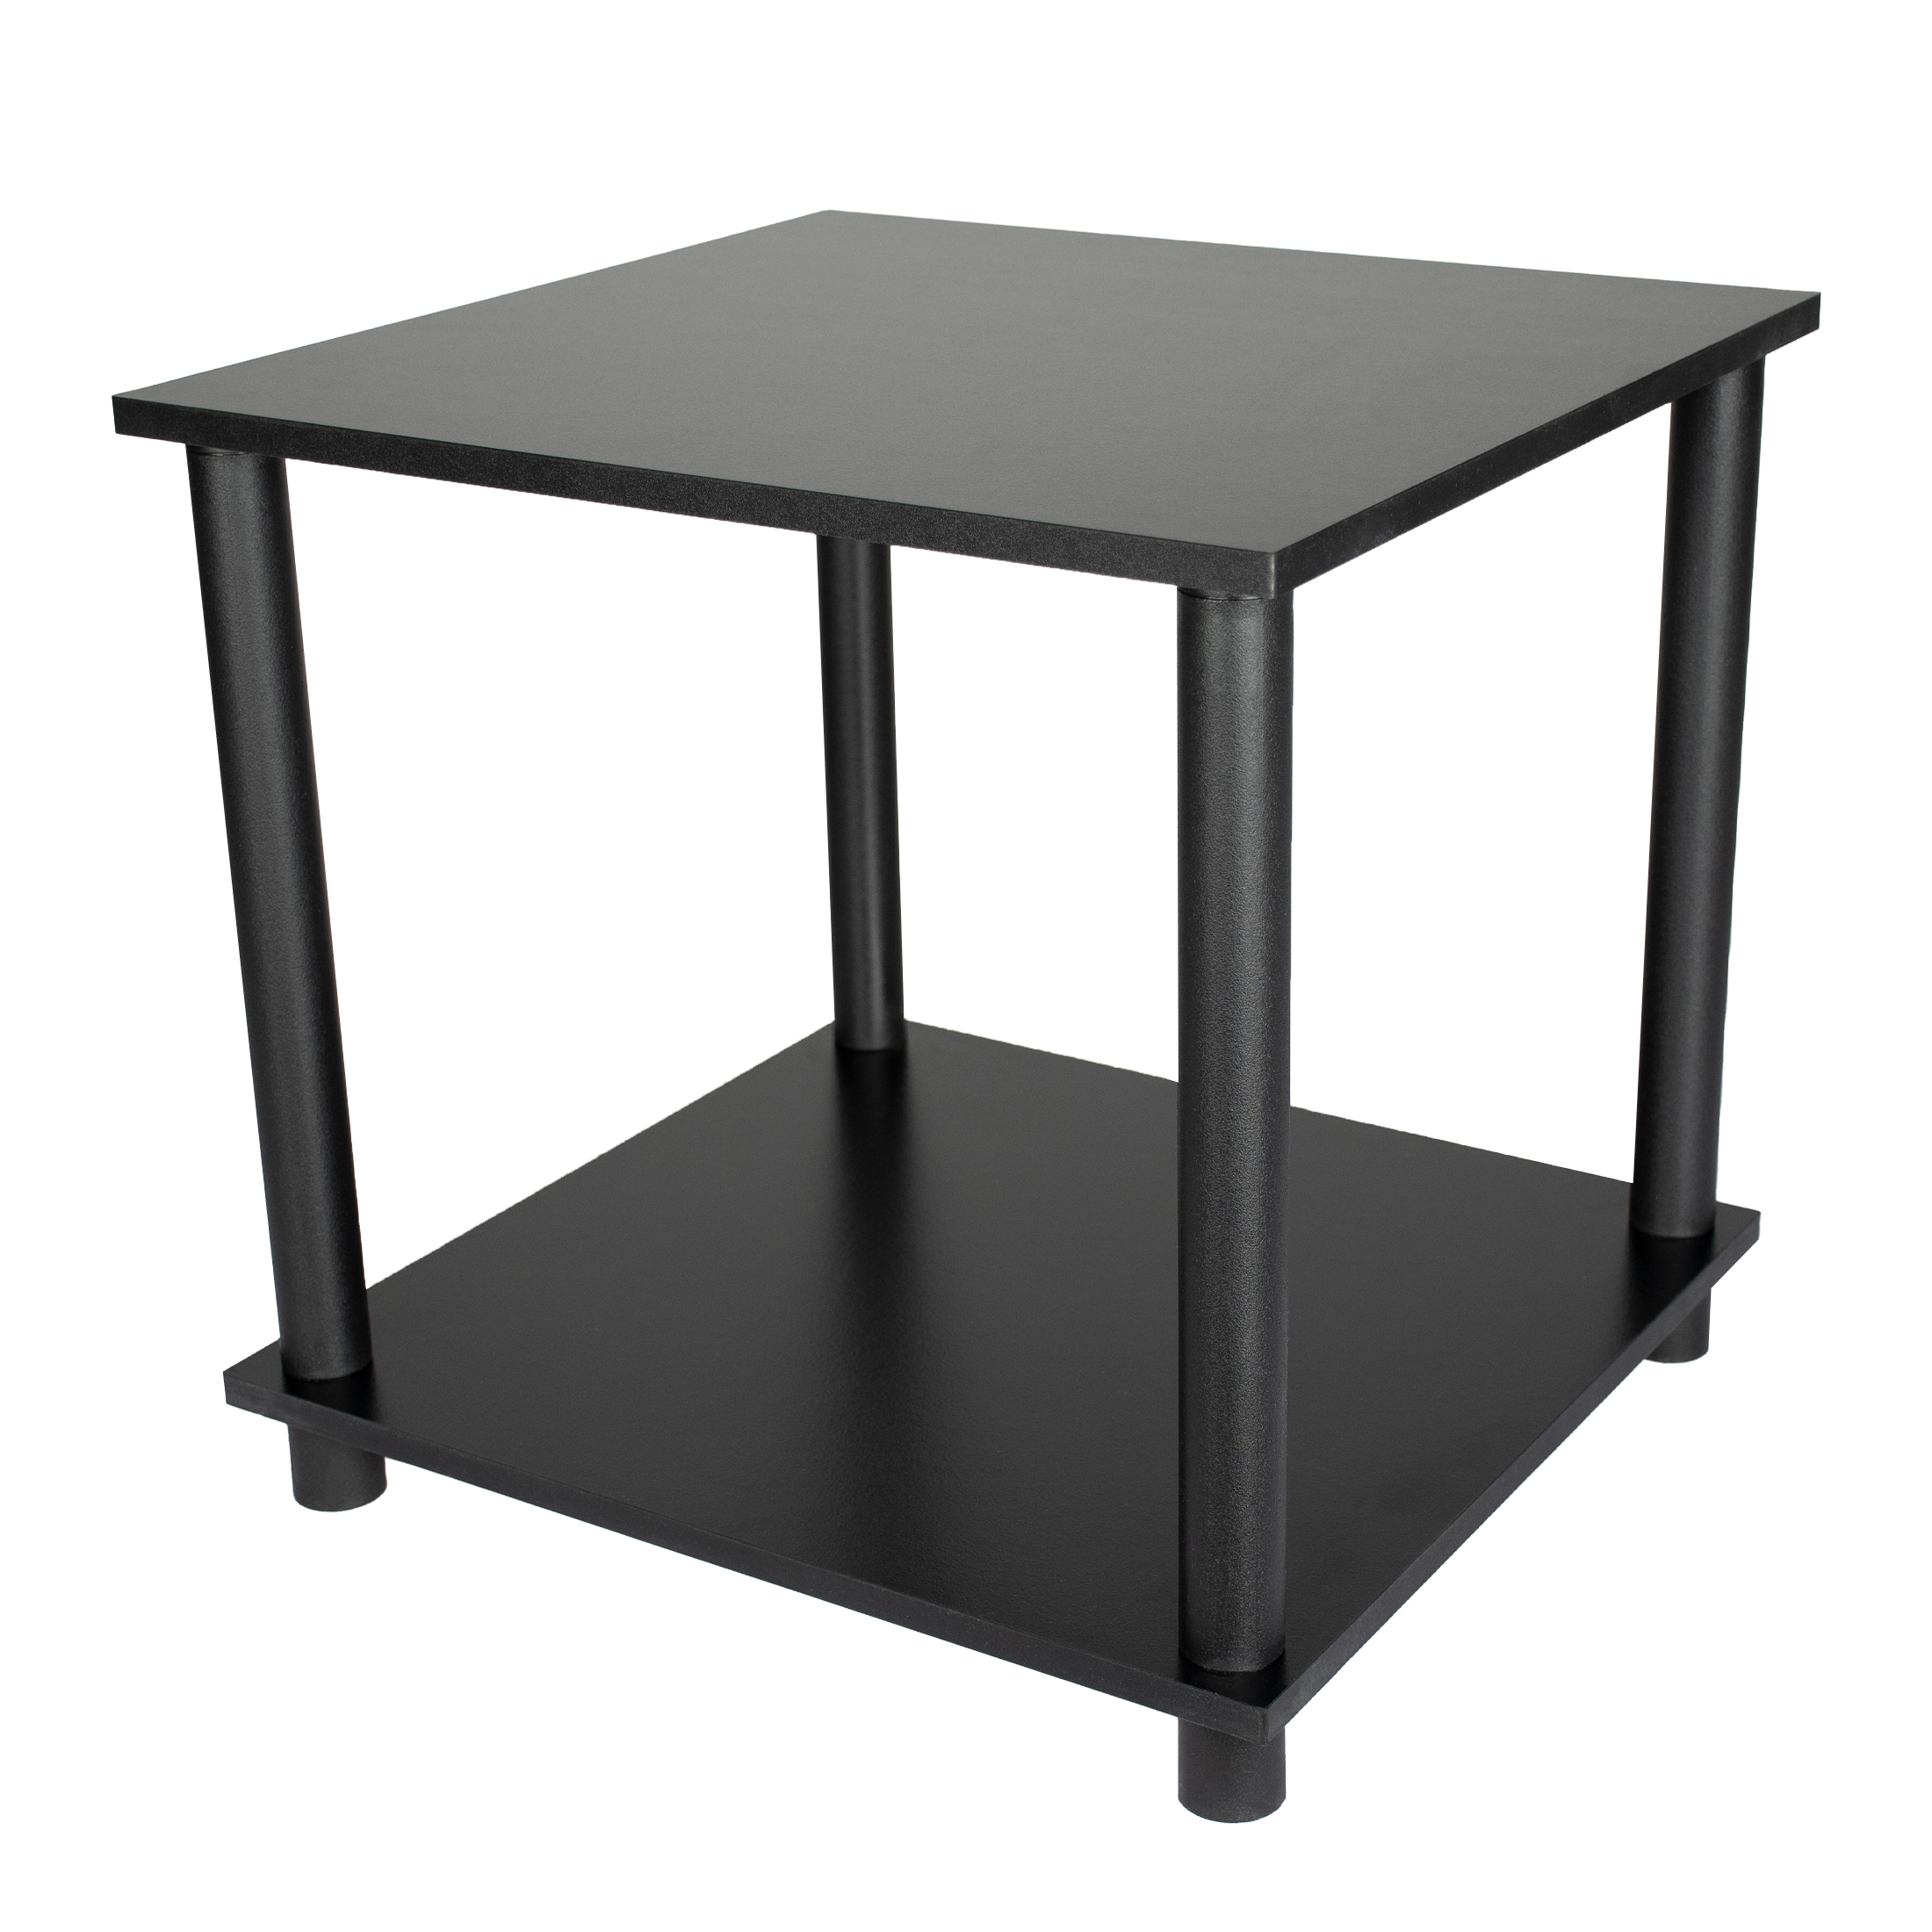 Mainstays No Tools End Tables, Solid Black, Set of 2 - image 4 of 8